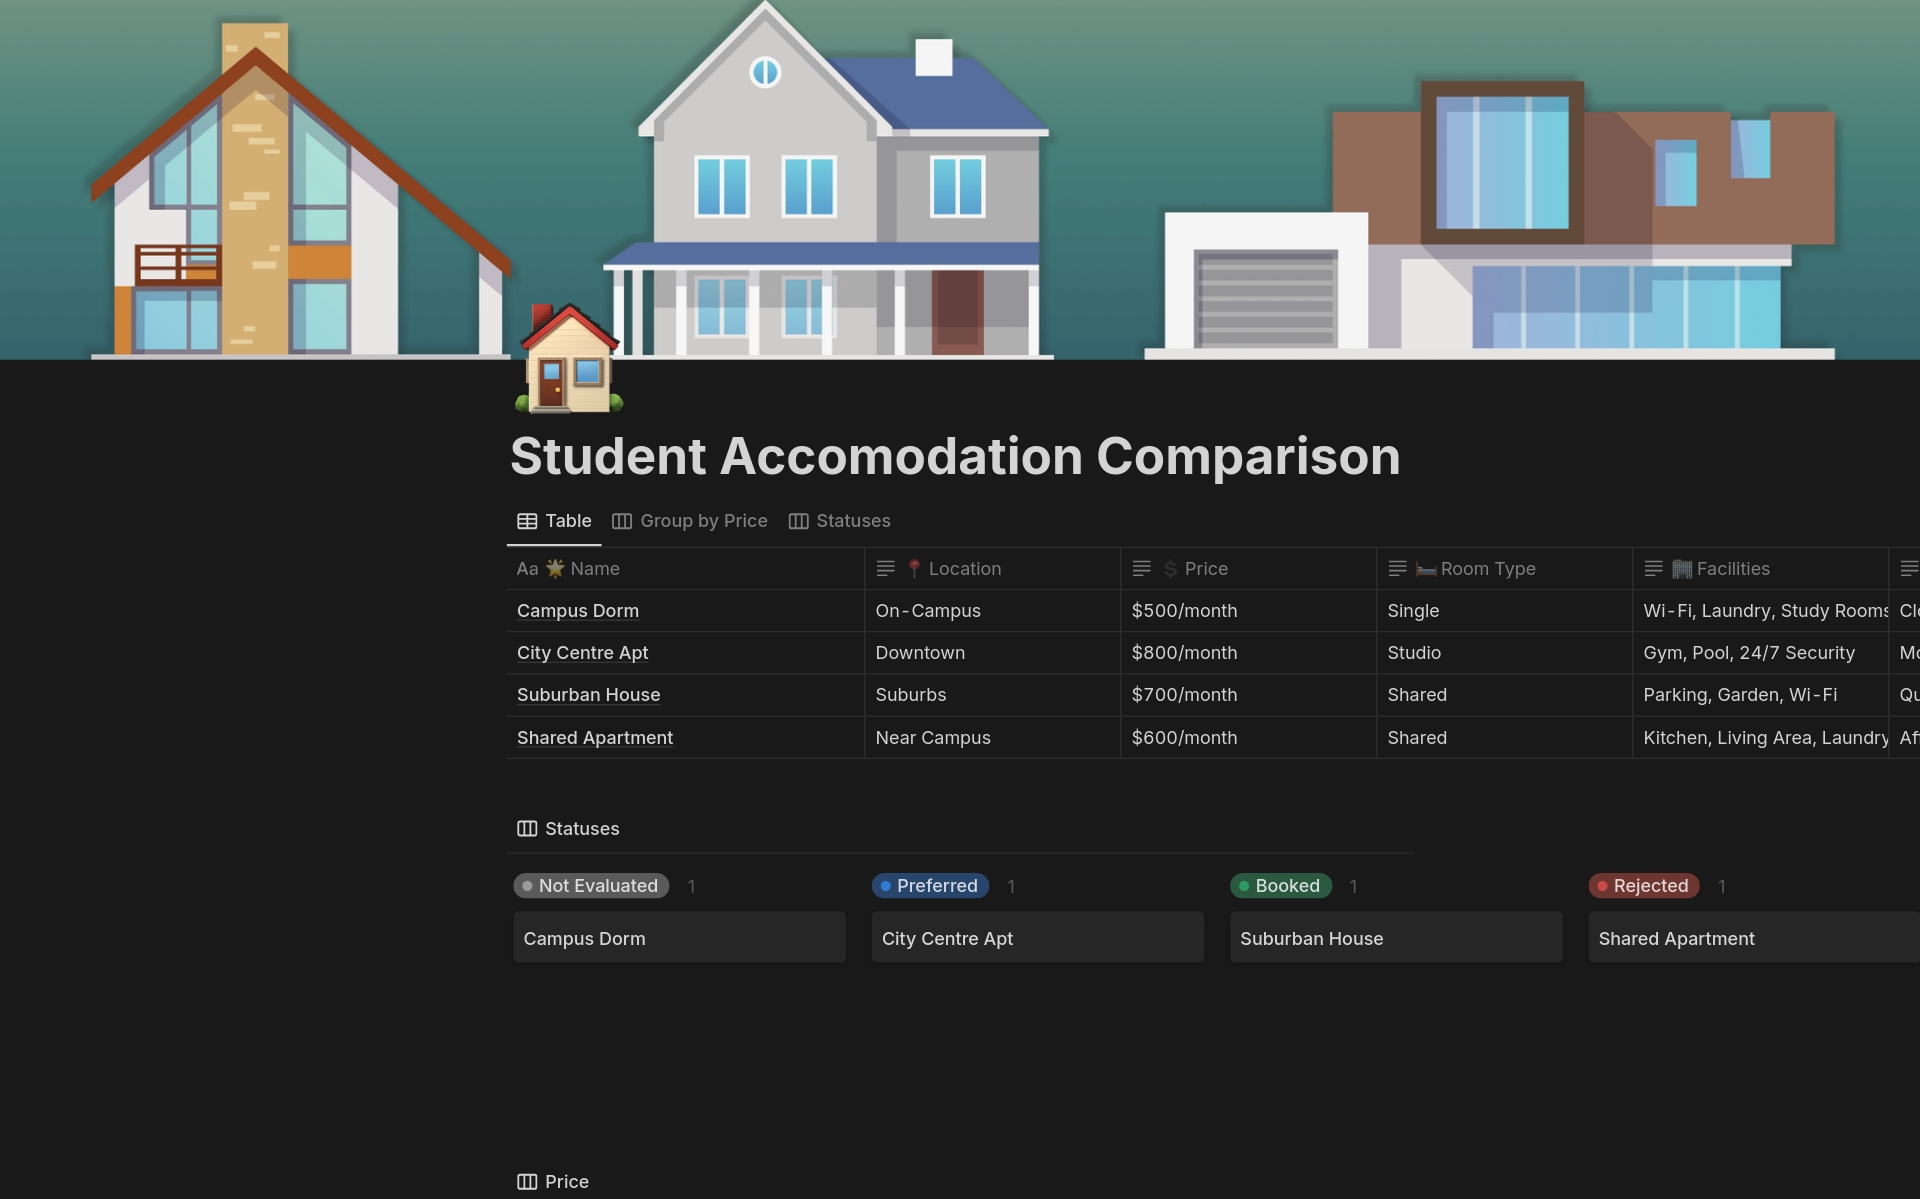 Our Notion template simplifies the process of comparing student accommodations, allowing you to evaluate key factors and organize your findings to make informed decisions easily.